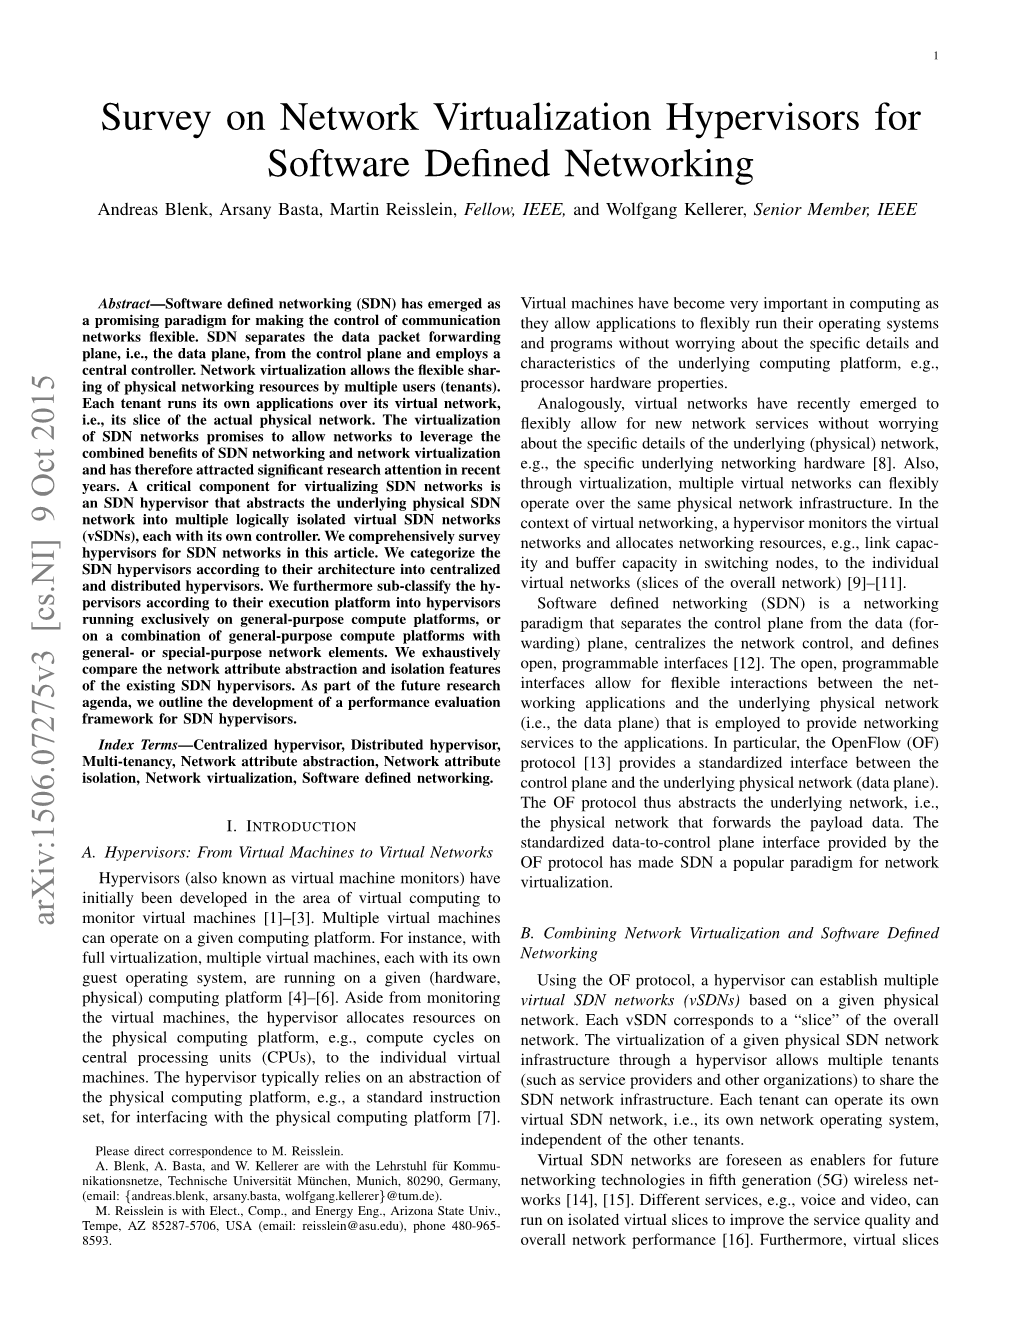 Survey on Network Virtualization Hypervisors for Software Defined Networking